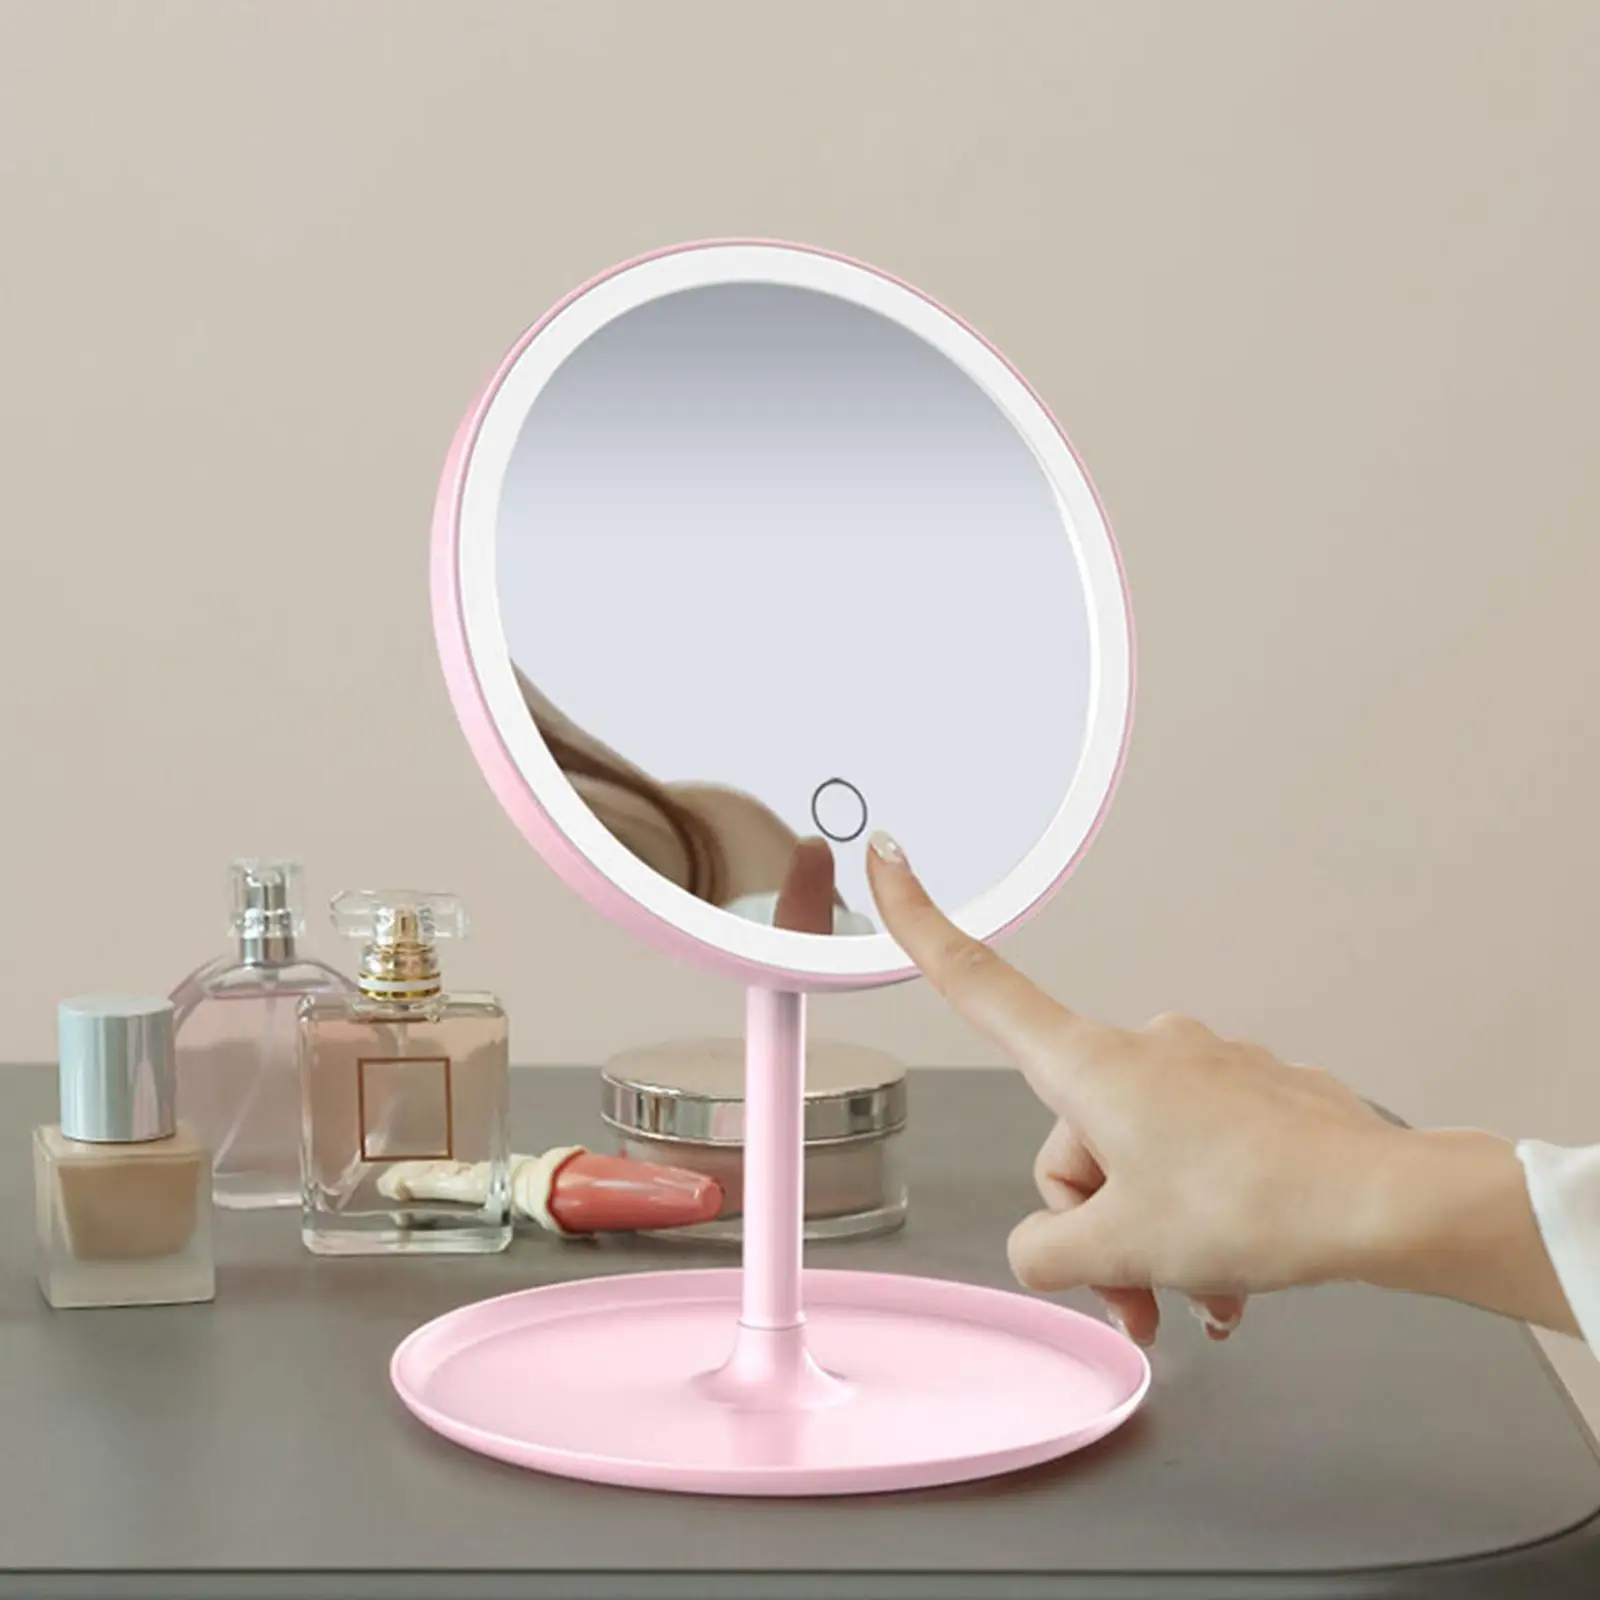 LED Desktop Standing Makeup Mirror with Lights Rechargeable for Bathroom